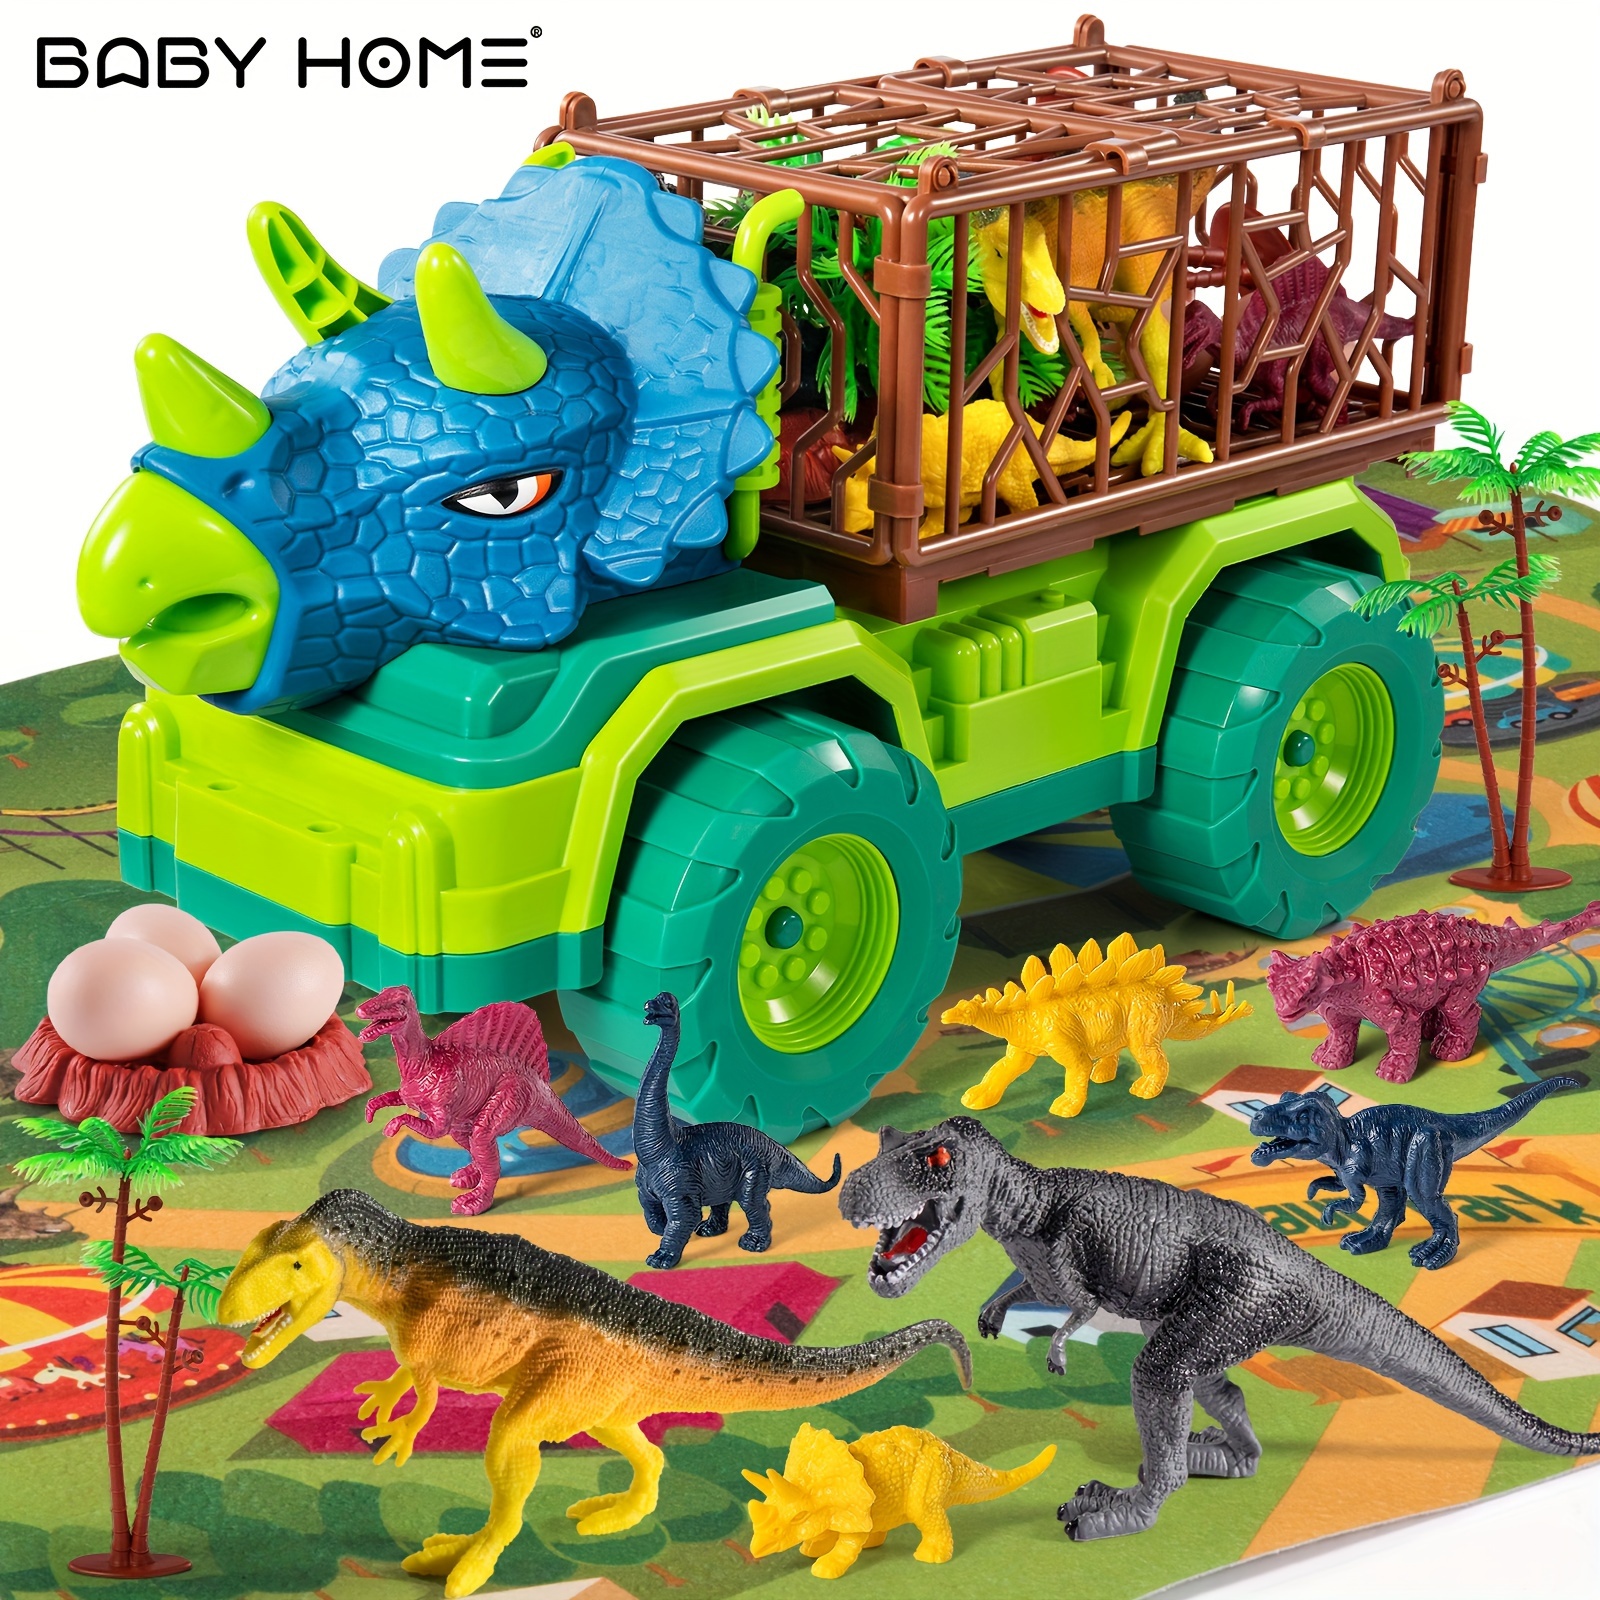 

Baby Home Dinosaur Truck Toy For Kids, Triceratops Transport Car Carrier Truck With 8 Dino Figures, Activity Play Mat, Dino Eggs And Trees, Capture Jurassic Dinosaur Play Set For Boys And Girls